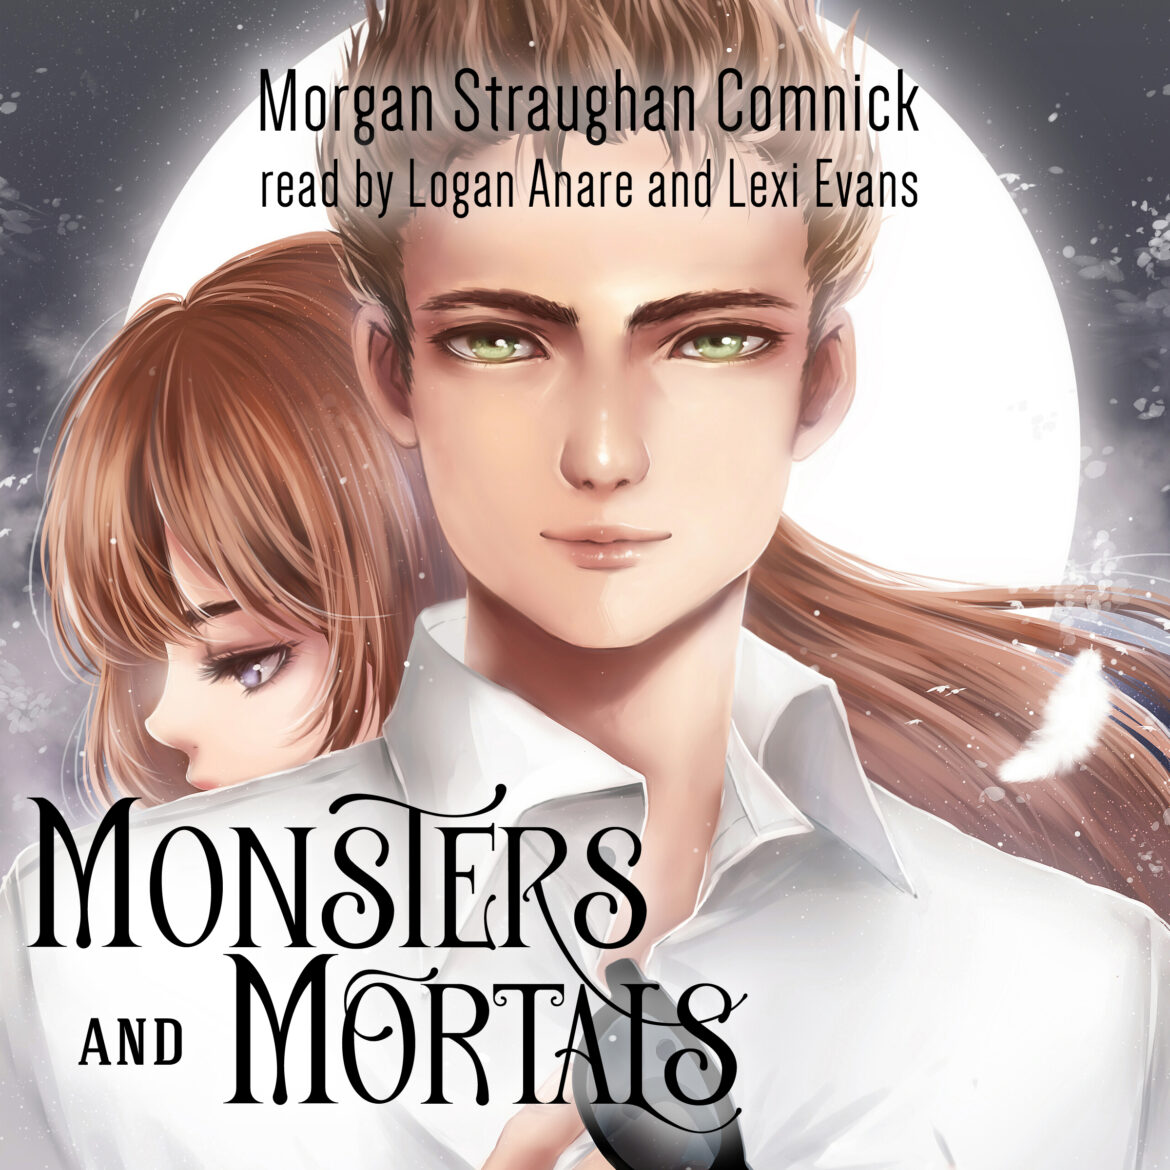 Kickstarter for Monsters and Mortals Down to Last Day